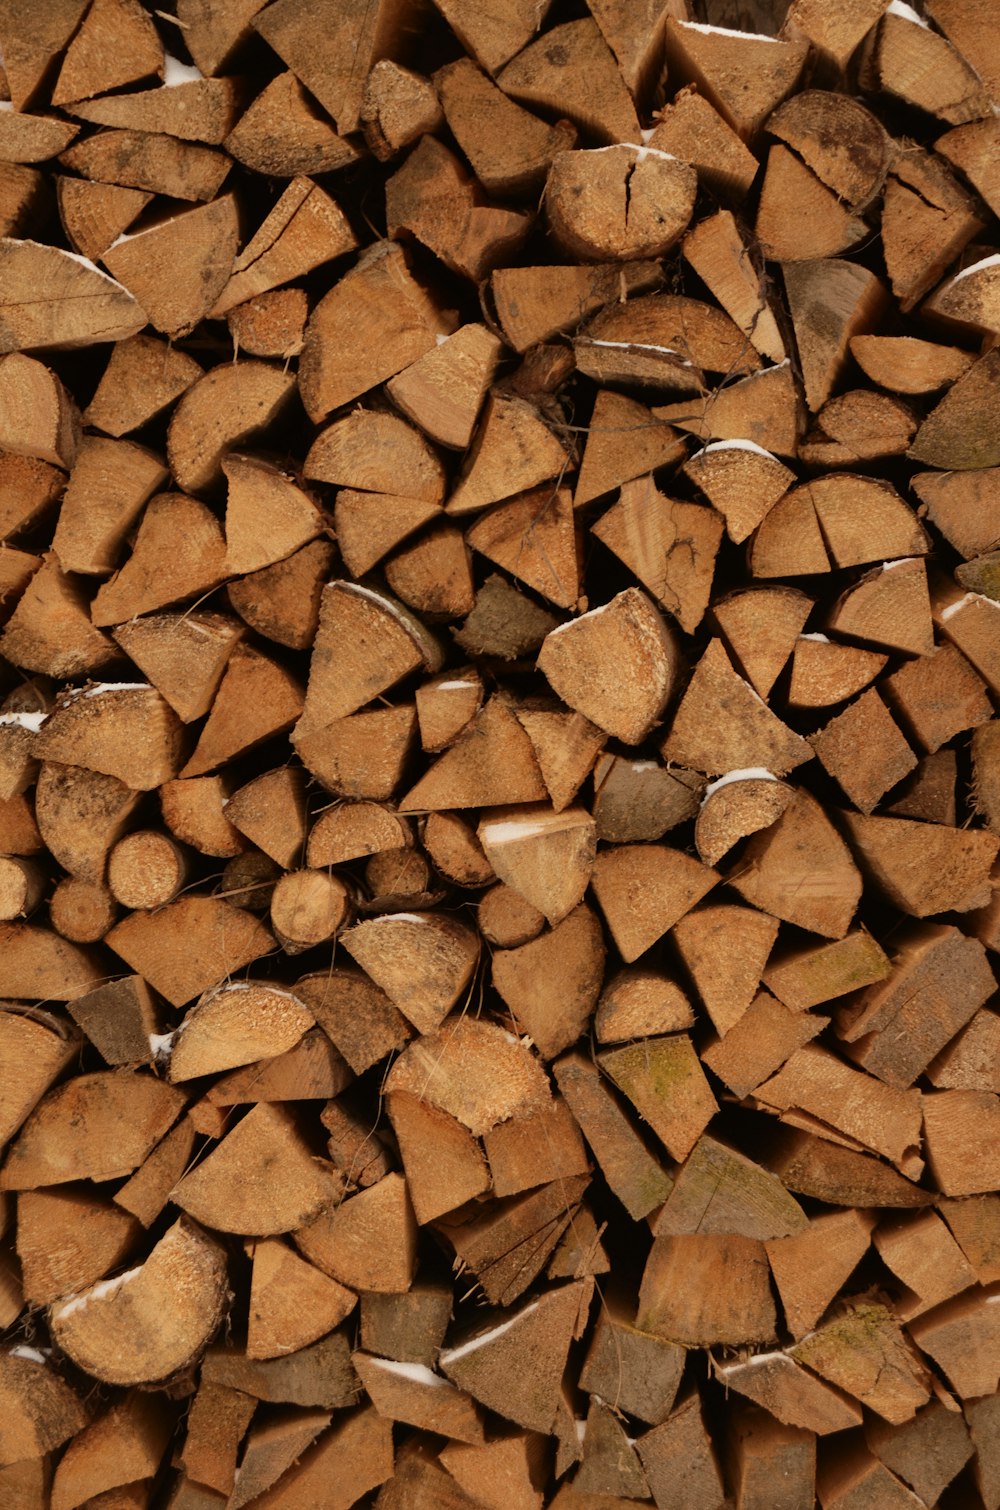 brown wooden stick lot in close up photography